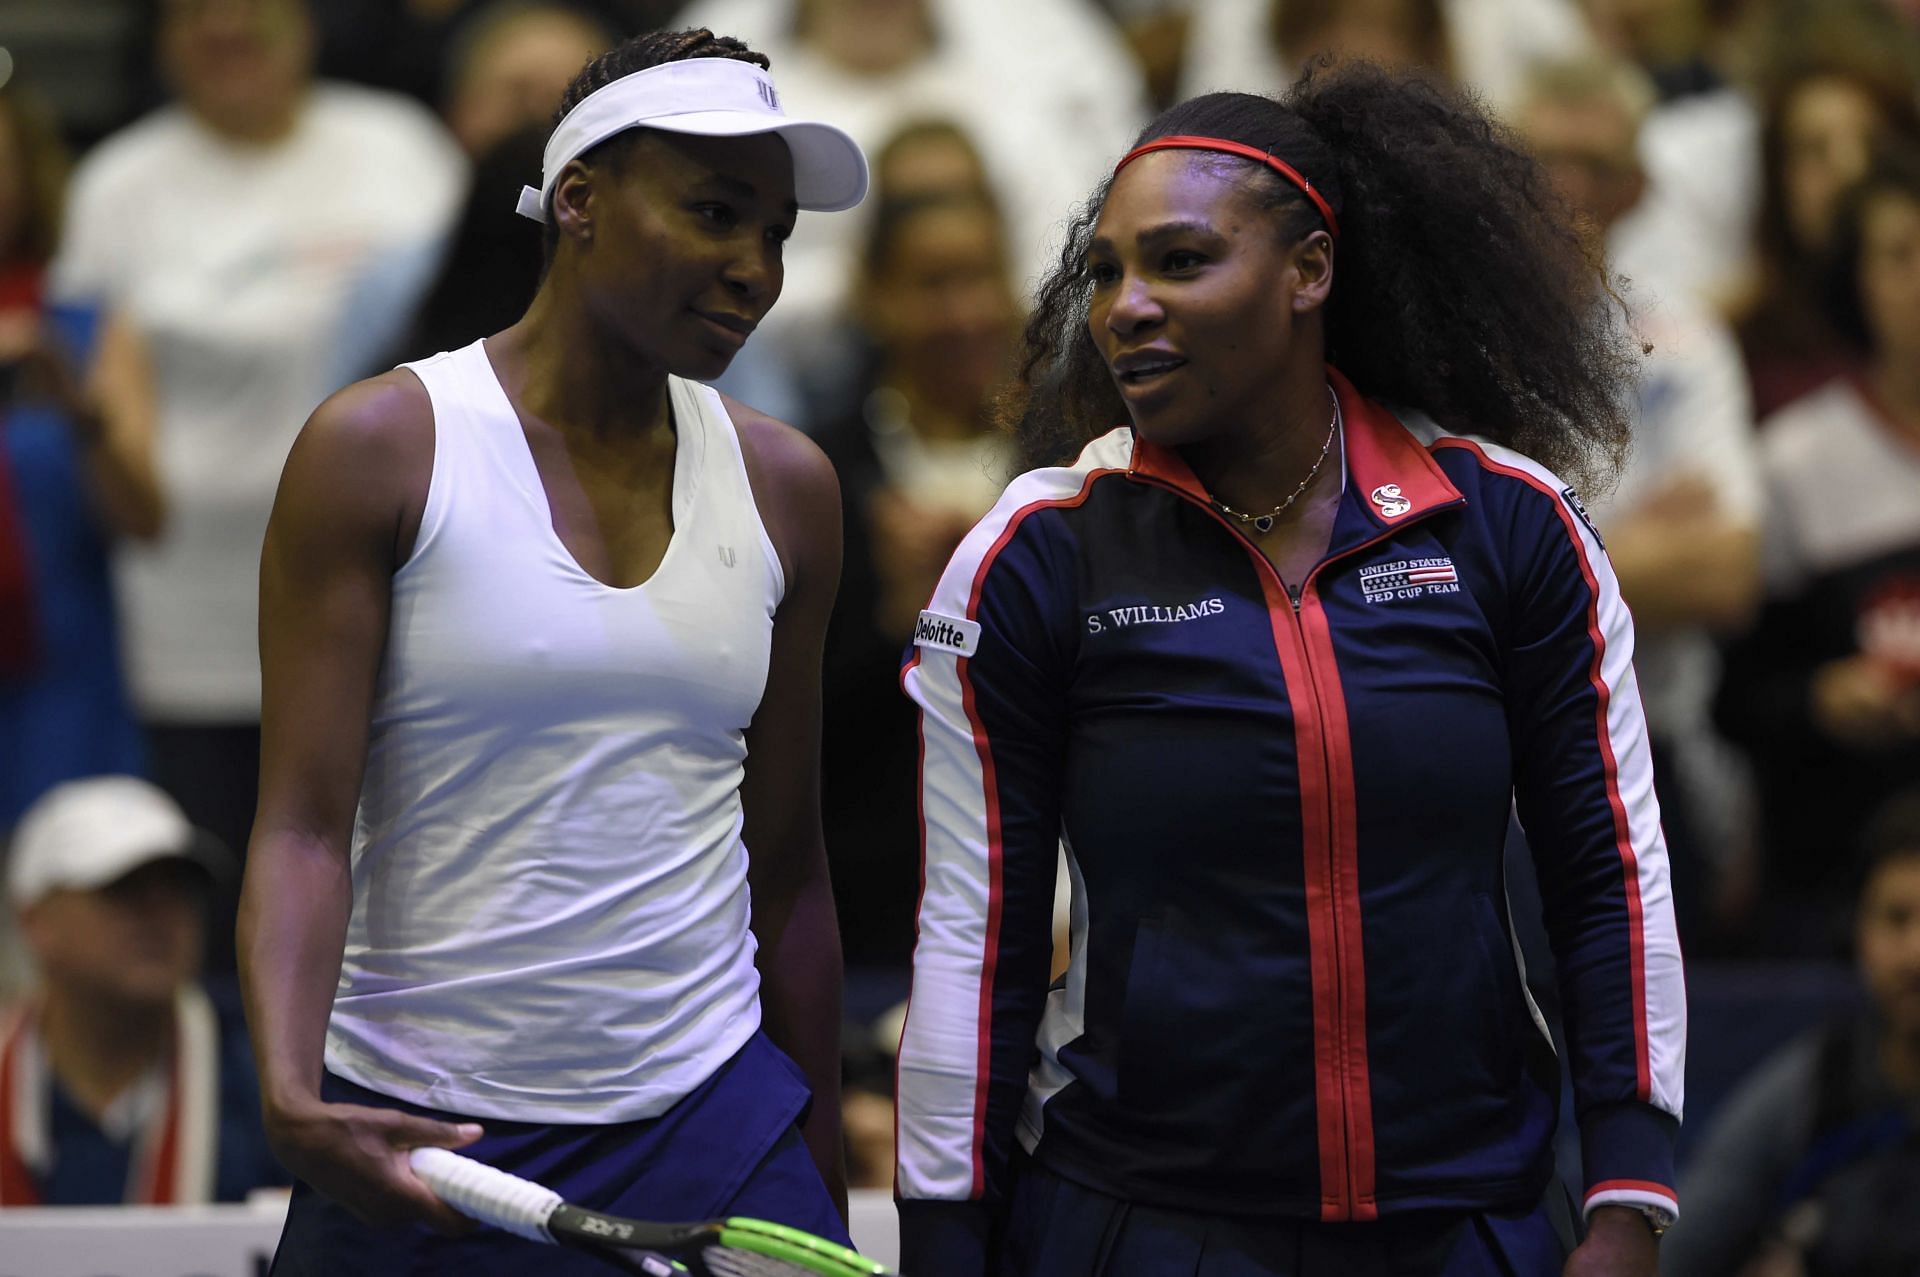 Venus and Serena Williams are credited as executive producers for the King Richard movie